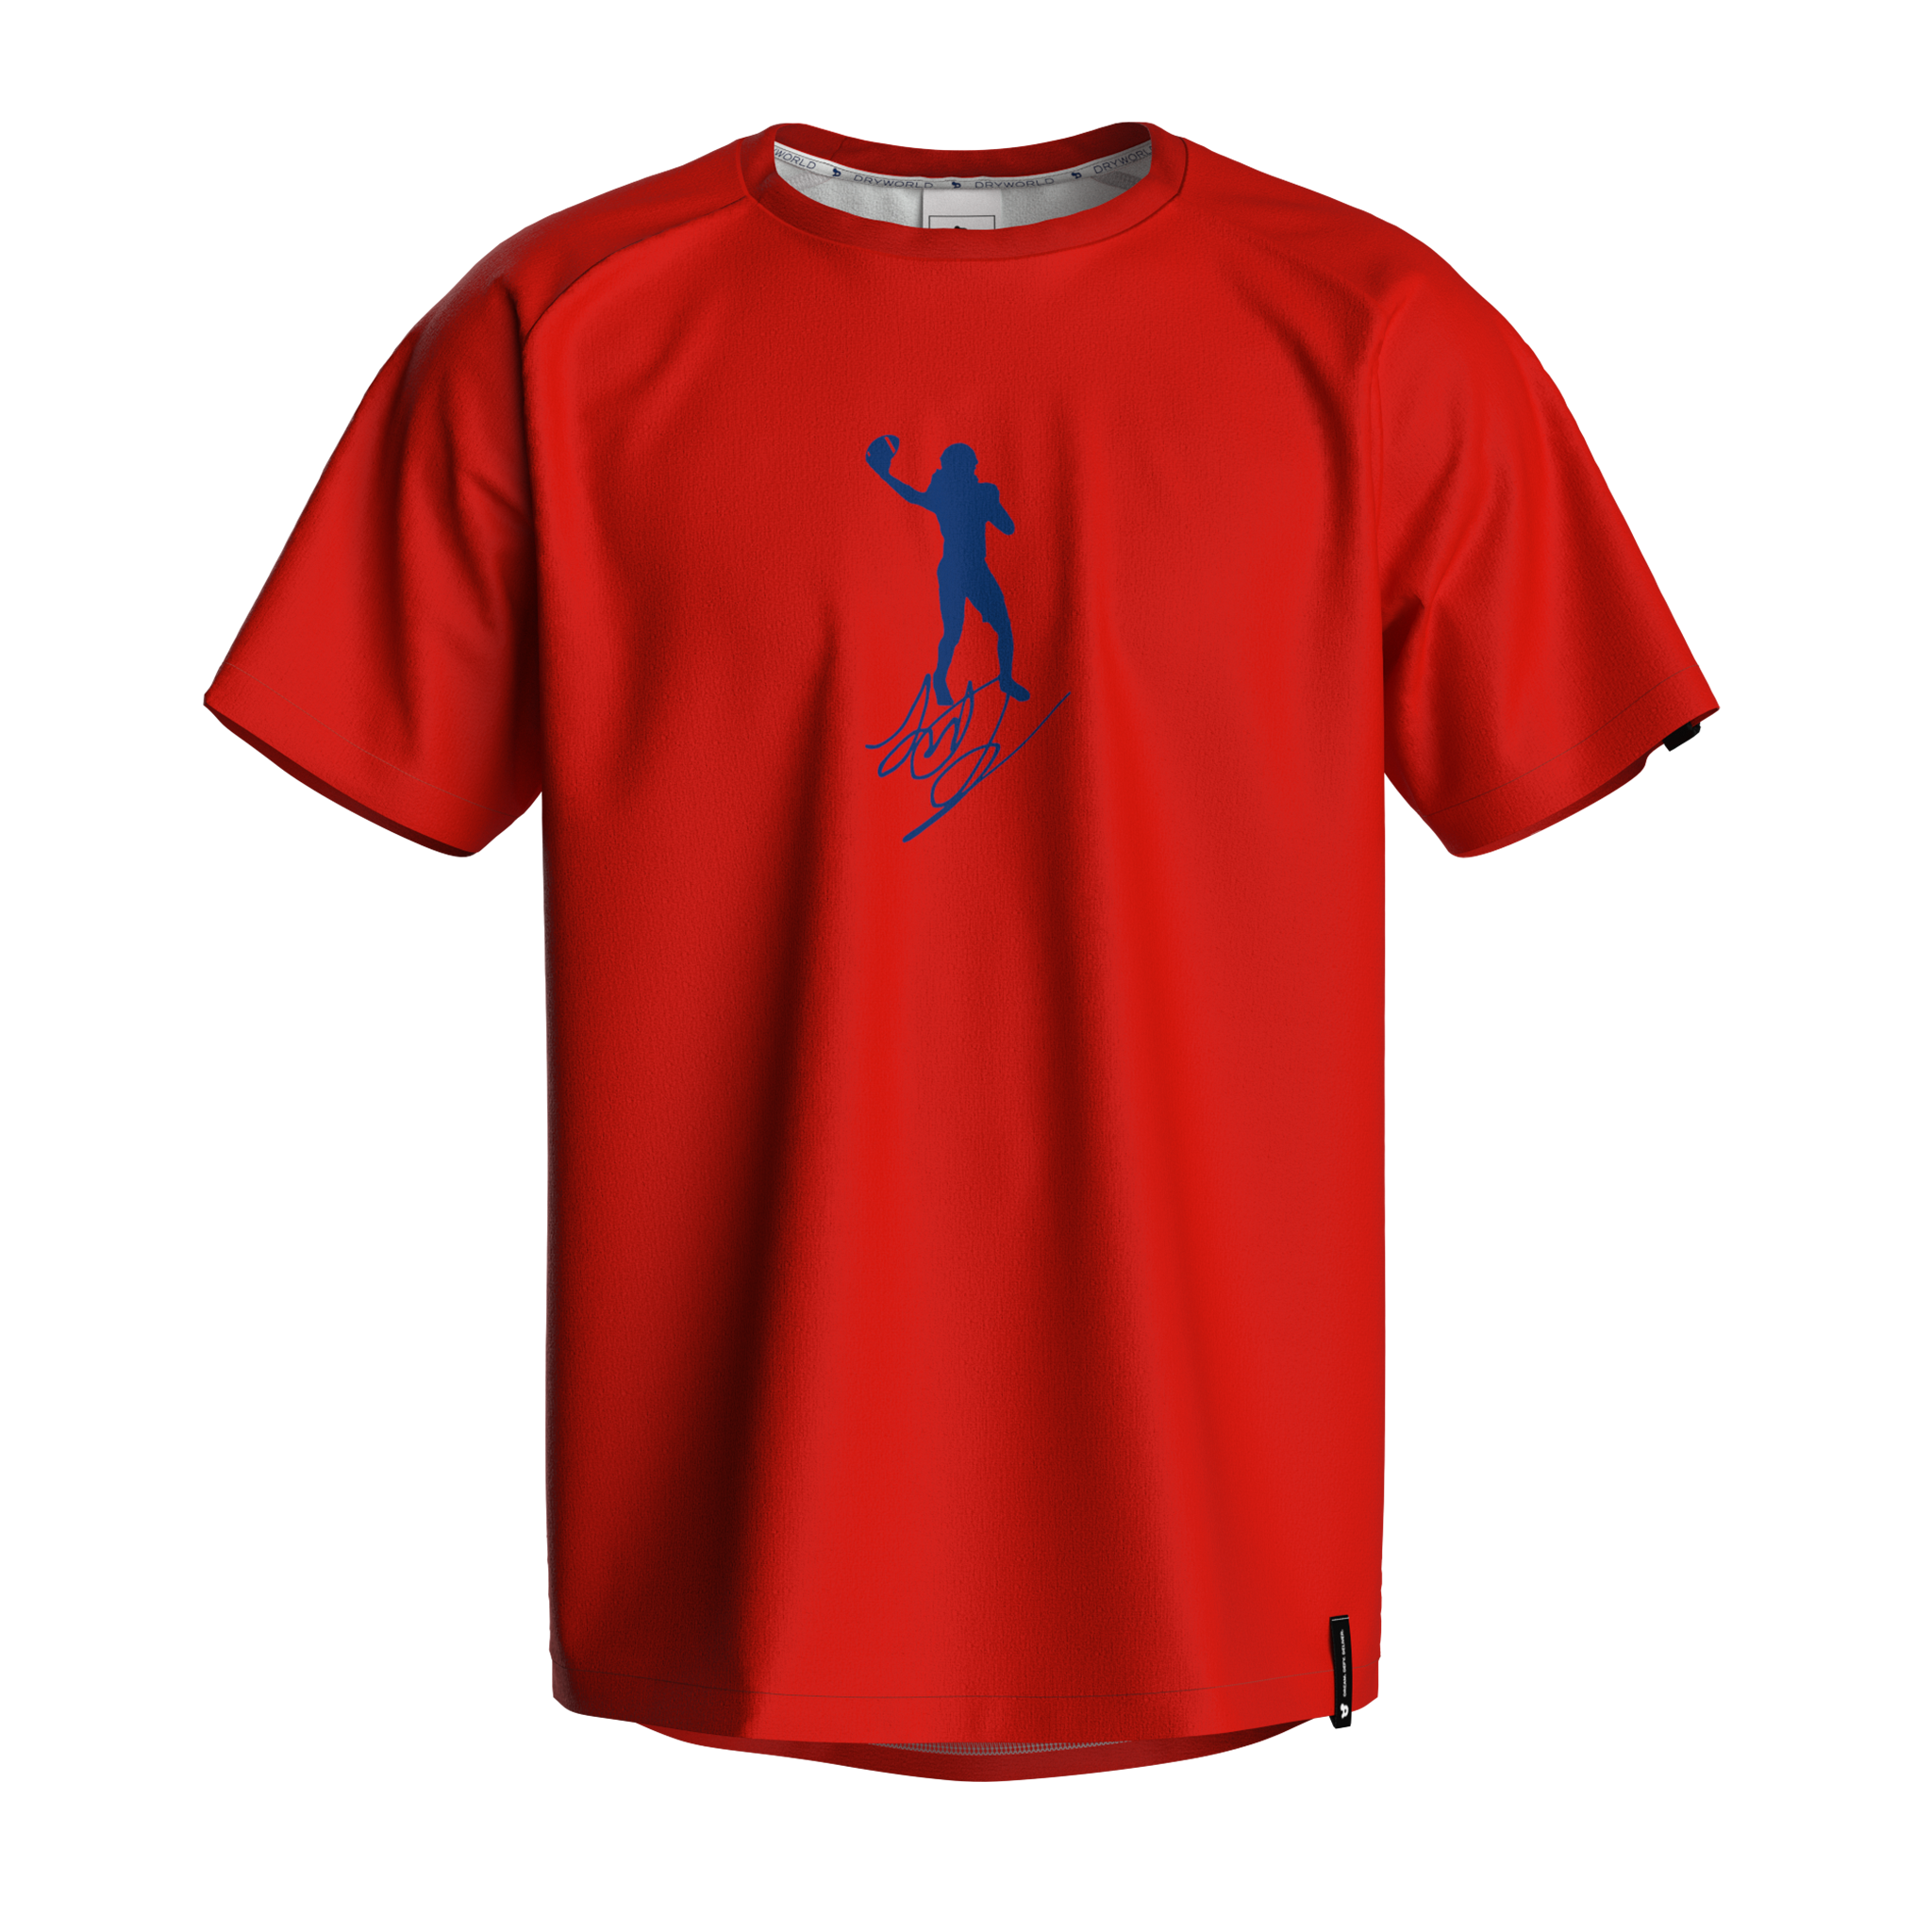 JayBrad_CoreD_Tee Red Front.png__PID:a0acef85-7ac9-4267-a48a-1ba440bf4526